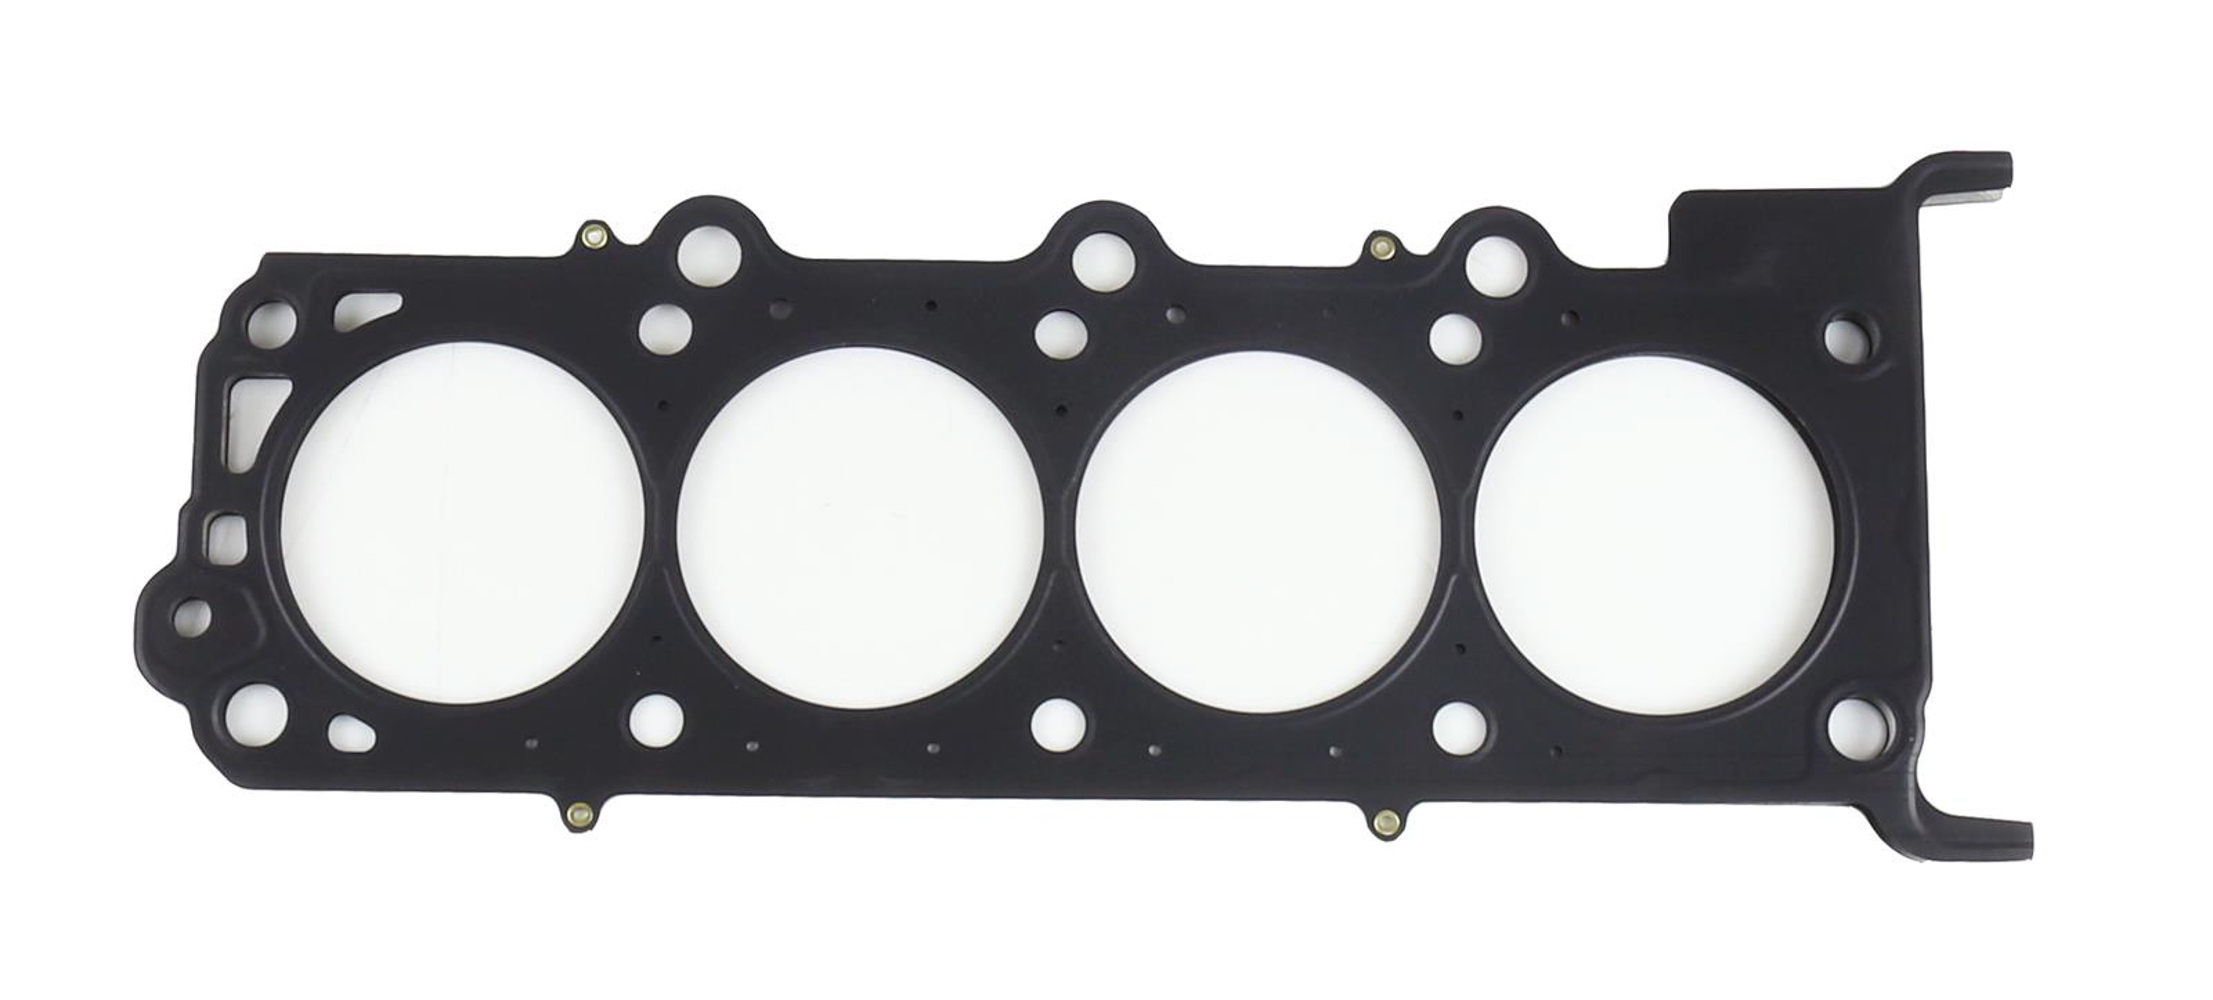 SCE Gaskets M466339VR - Cylinder Head Gasket, MLS Spartan, 3.630 in Bore, 0.039 in Compression Thickness, Multi-Layer Steel, Passenger Side, Ford Modular, Each